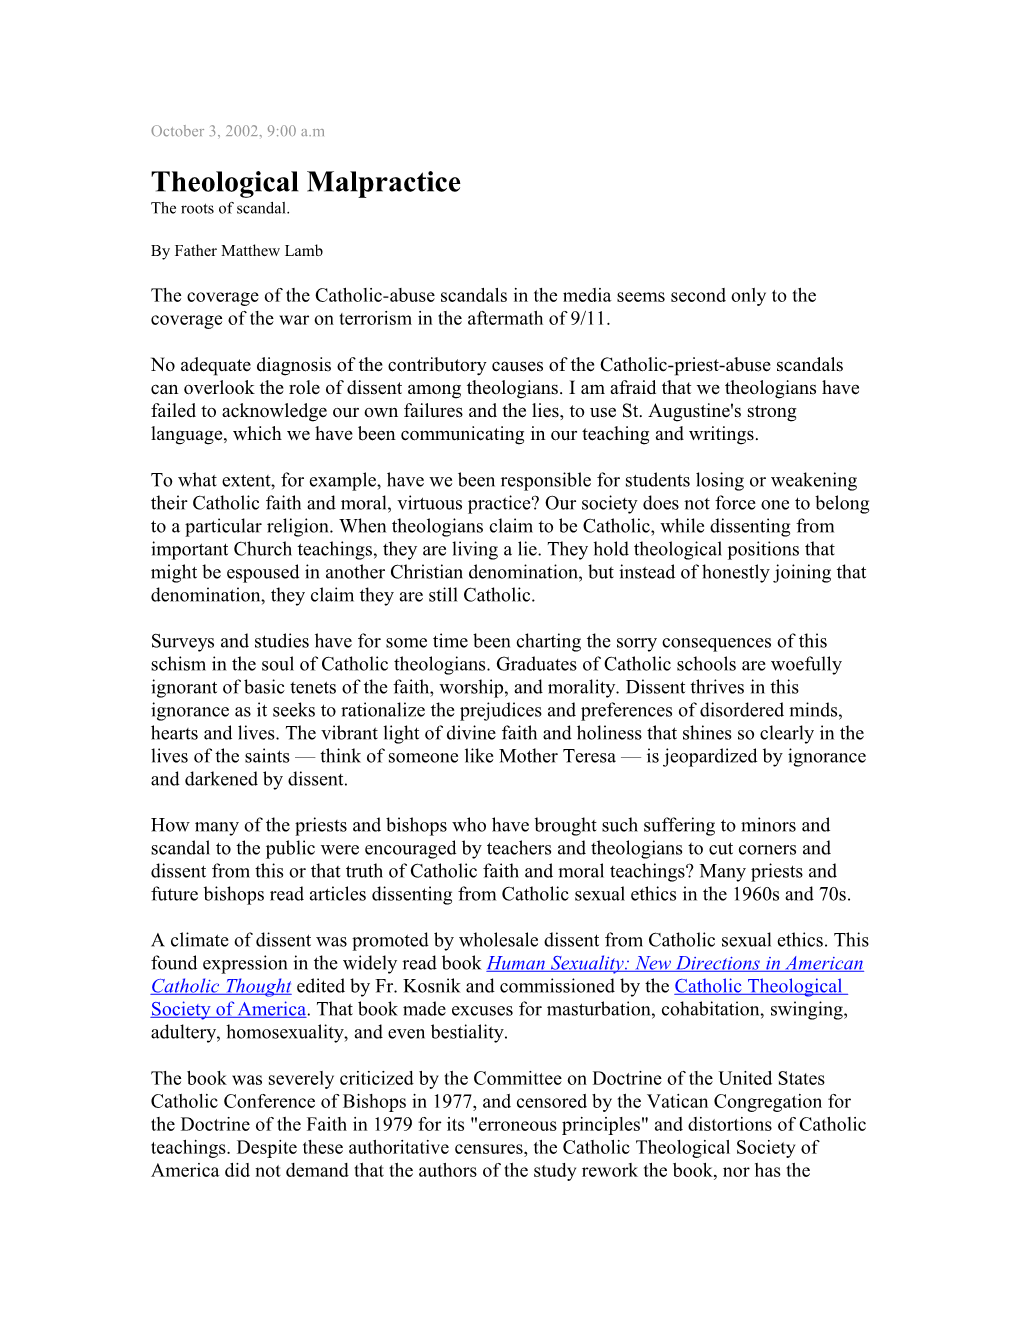 Theological Malpractice the Roots of Scandal